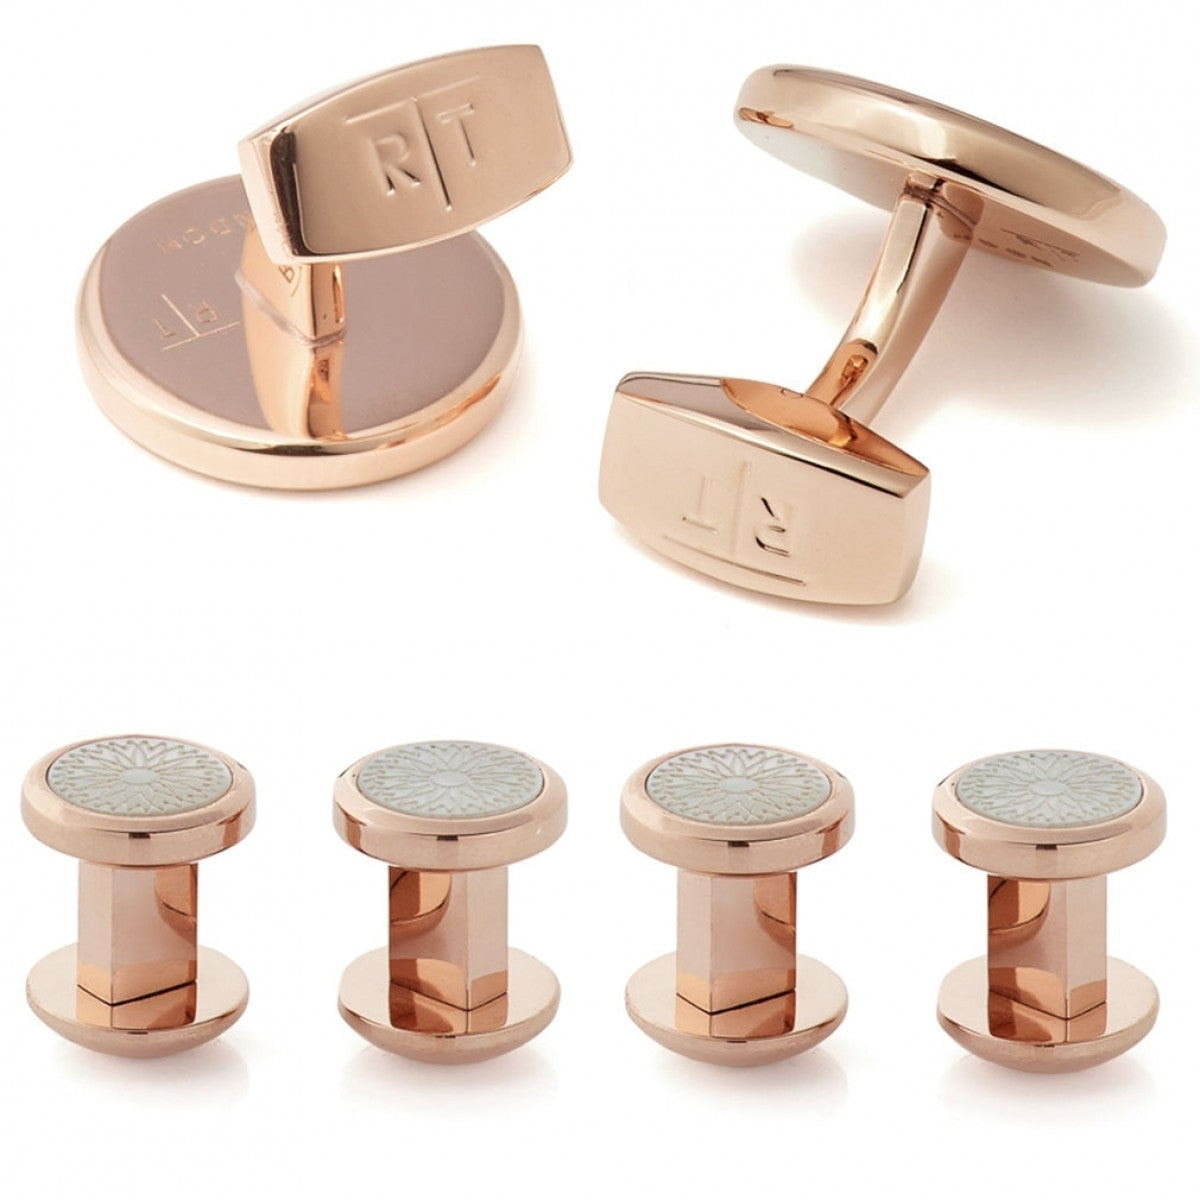 Tateossian Rotondo Guilloche IP Rose Gold Studs and Cufflinks Set, White Mother of Pearl